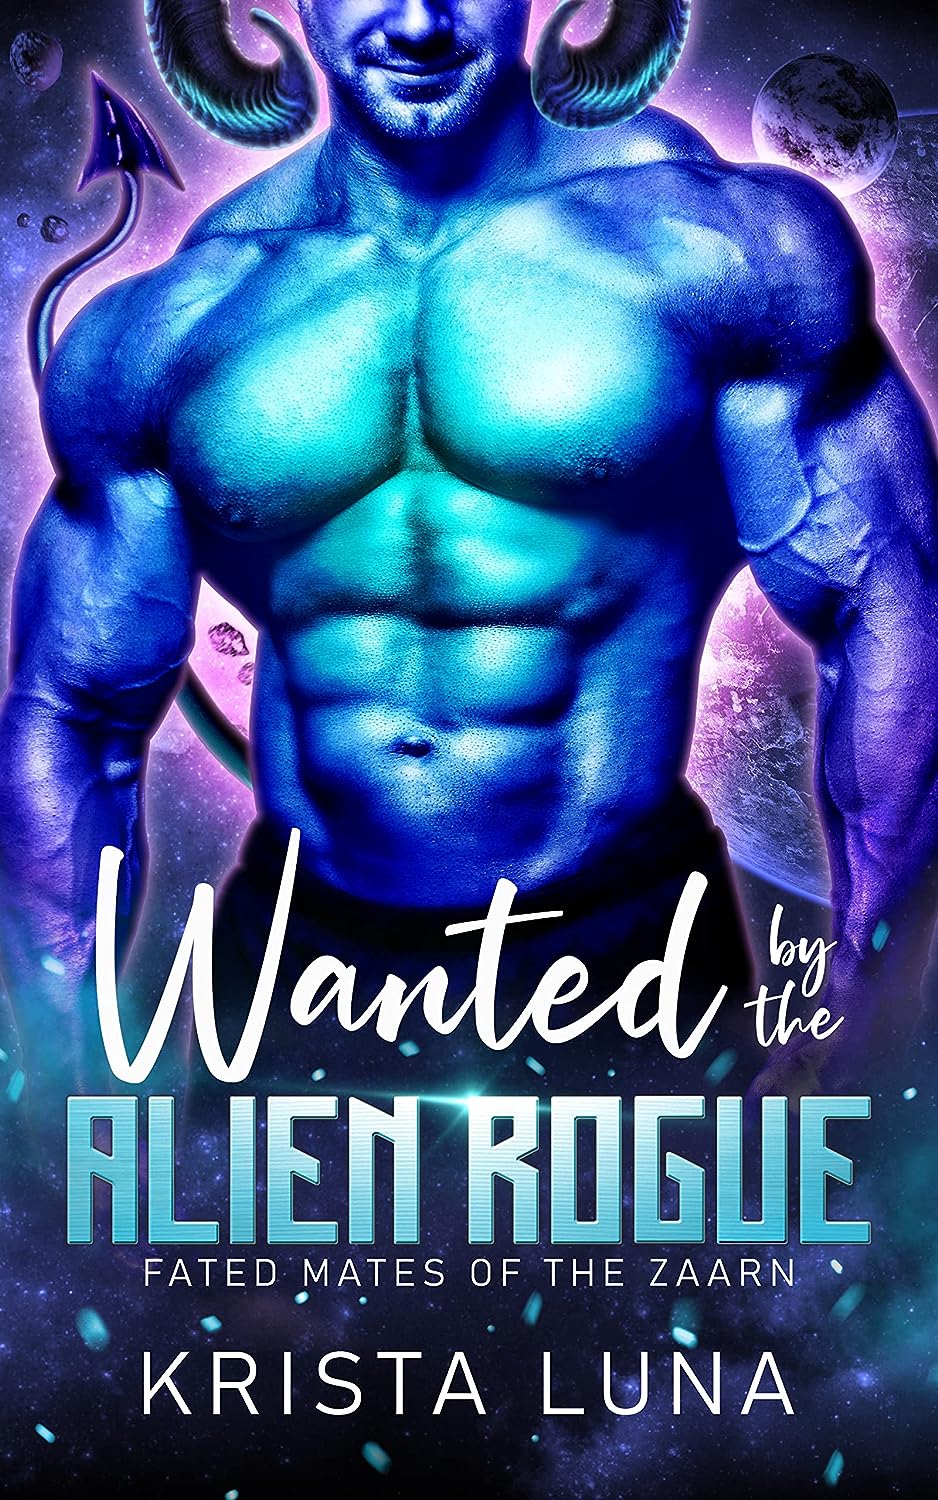 Wanted by the Alien Rogue by Krista Luna